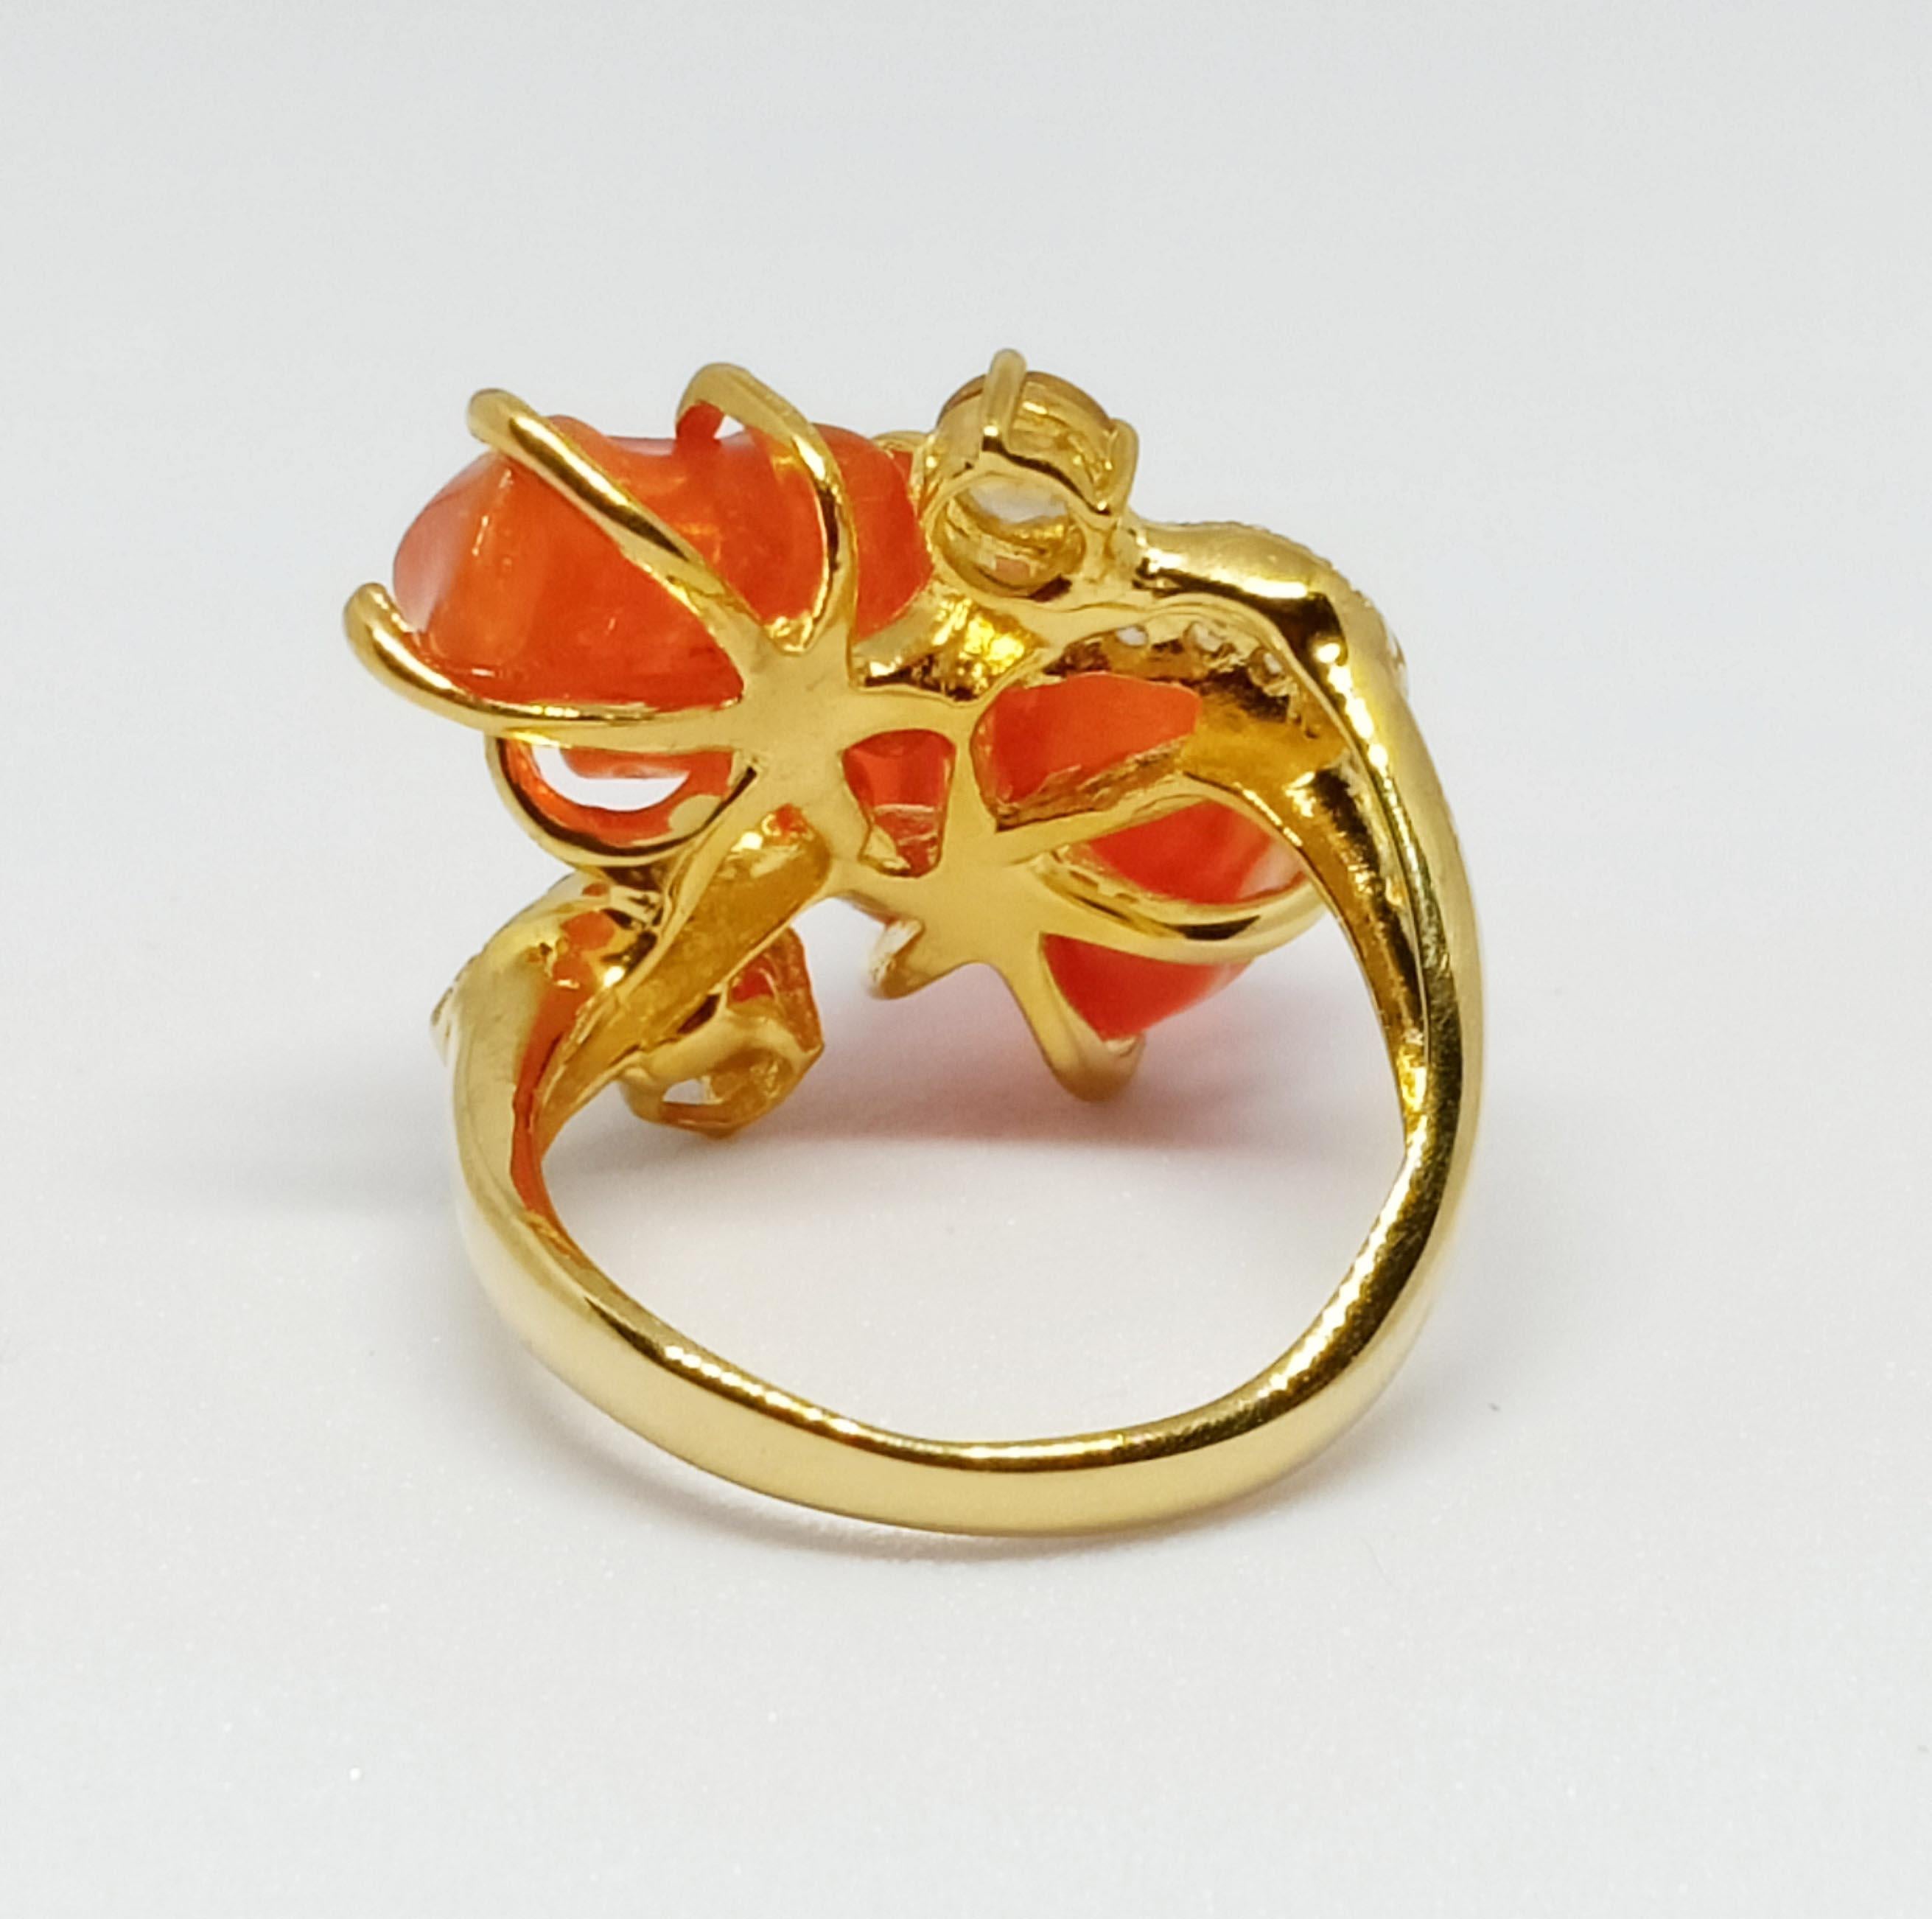 Uncut Orange Opal ring (Ethiopian) 18kgold plated over sterling silver